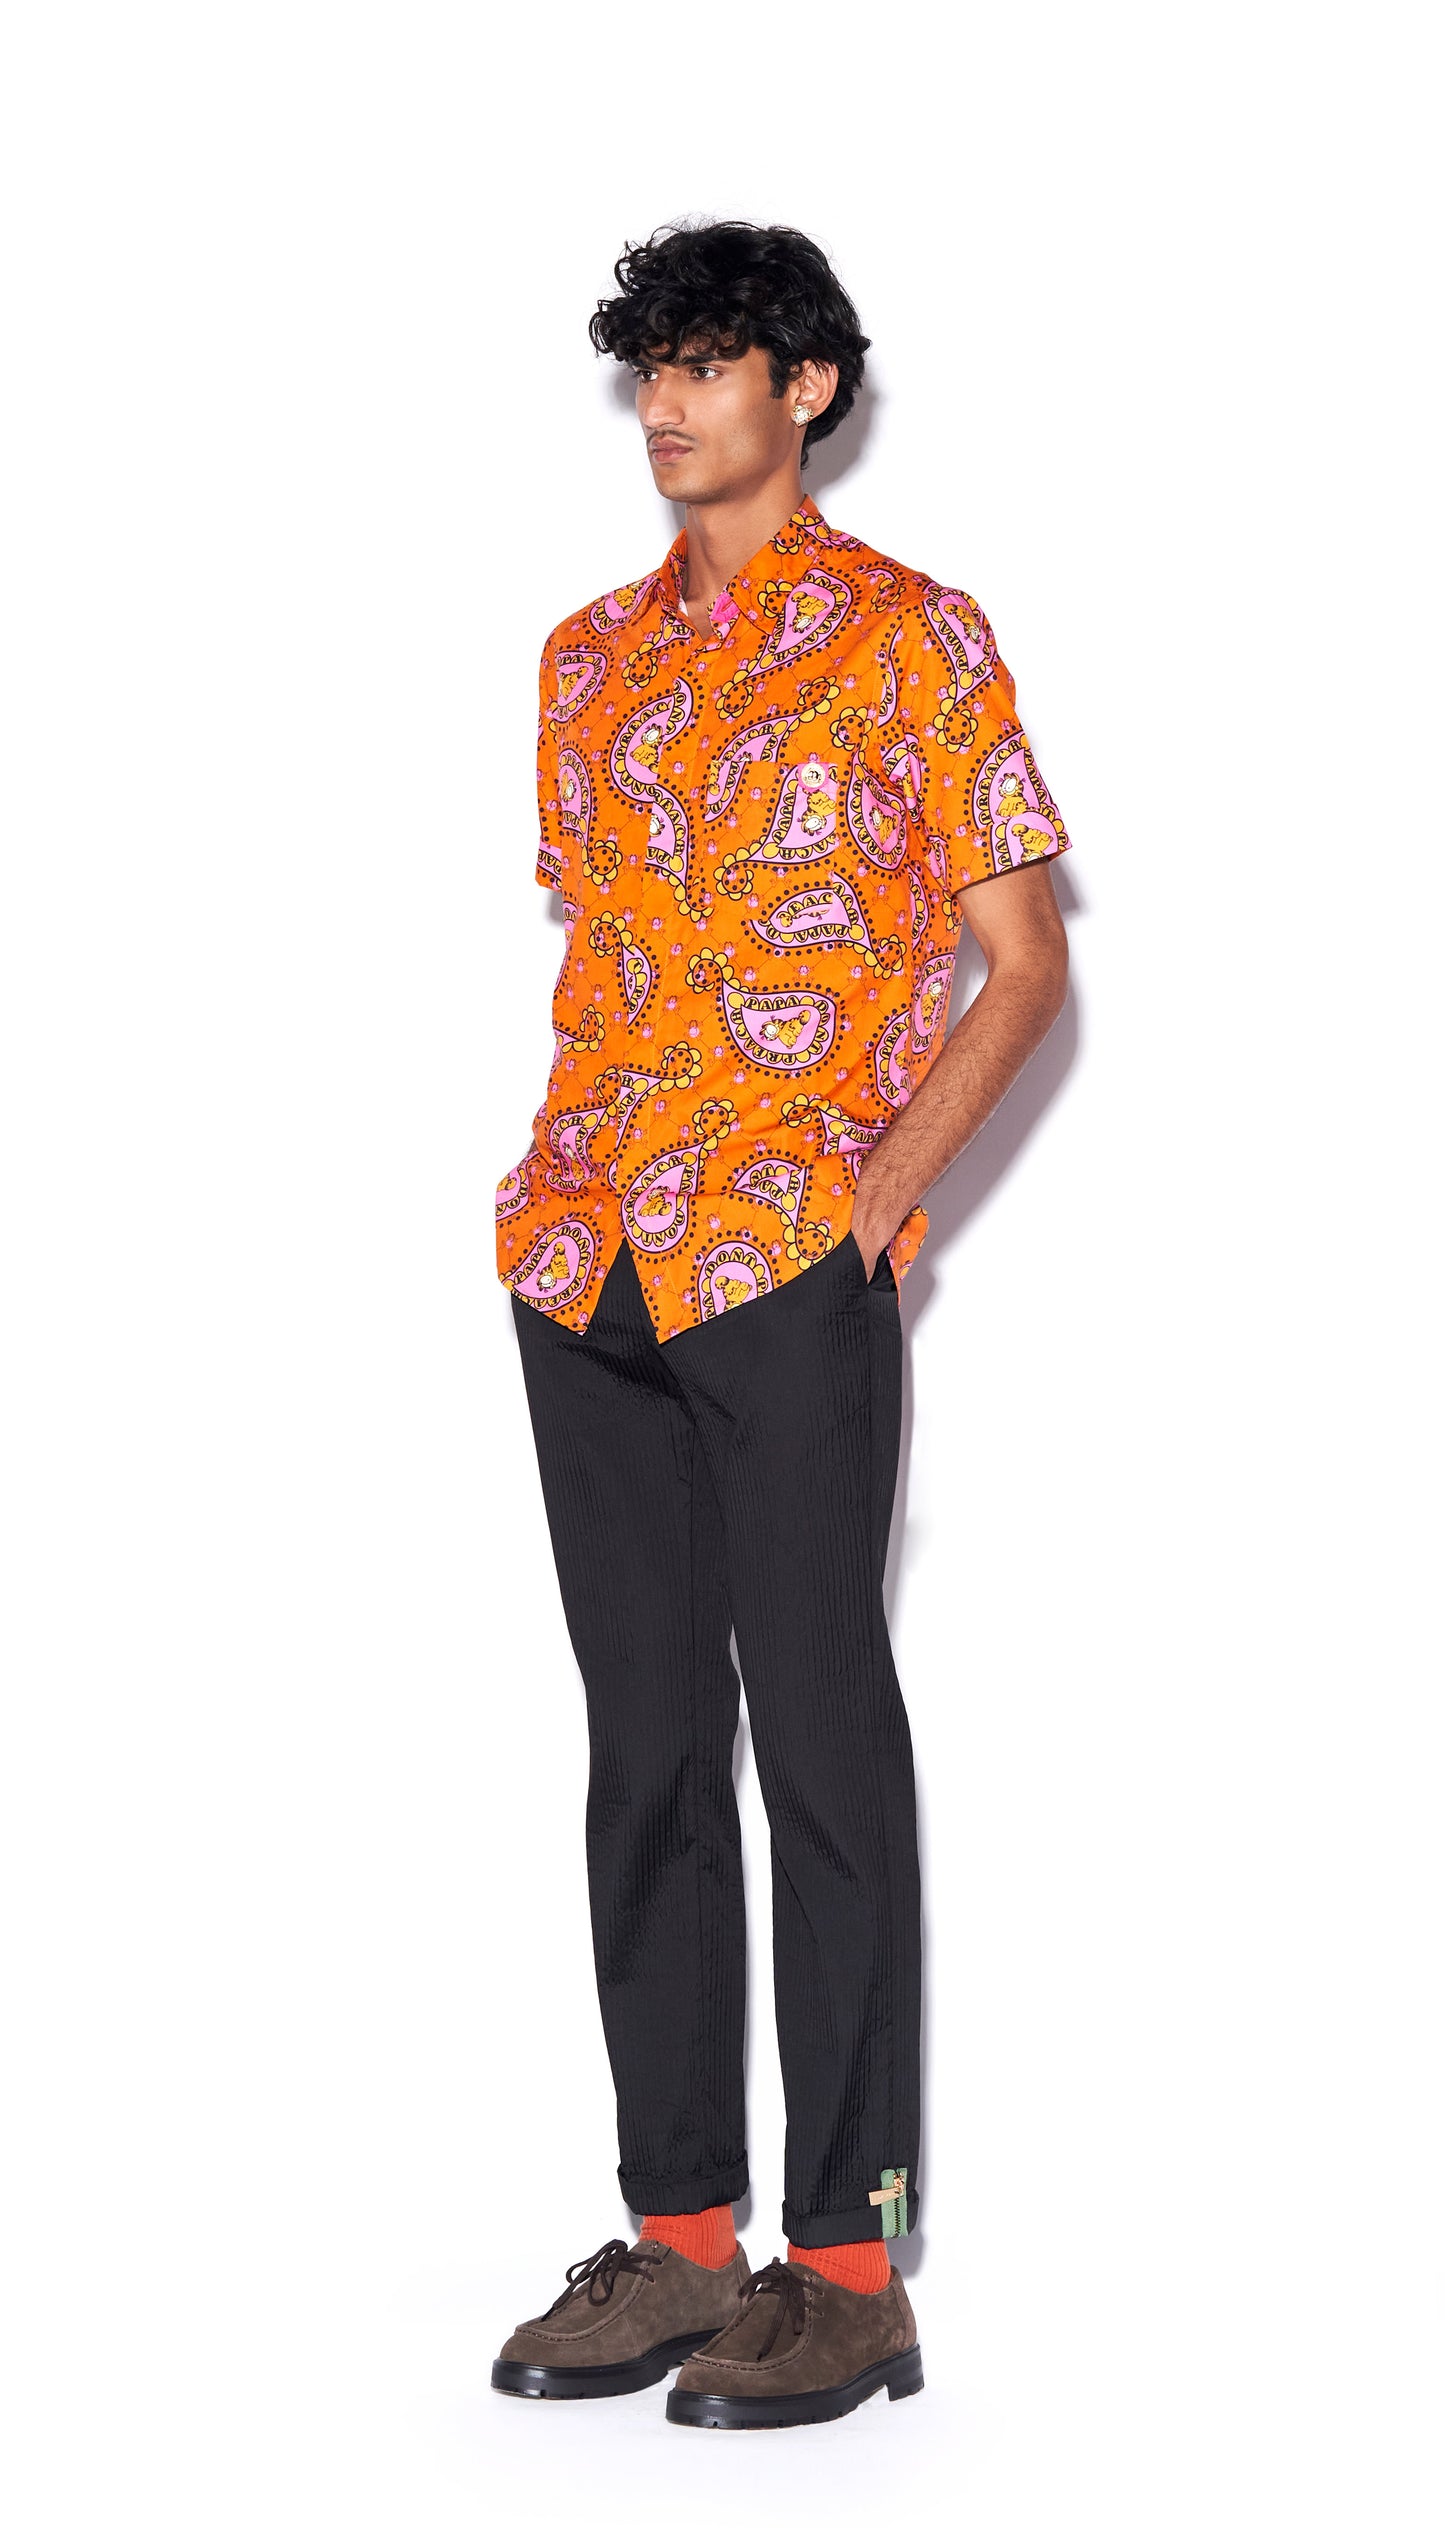 Sun's out - Shirt in Orange  Paisley Print